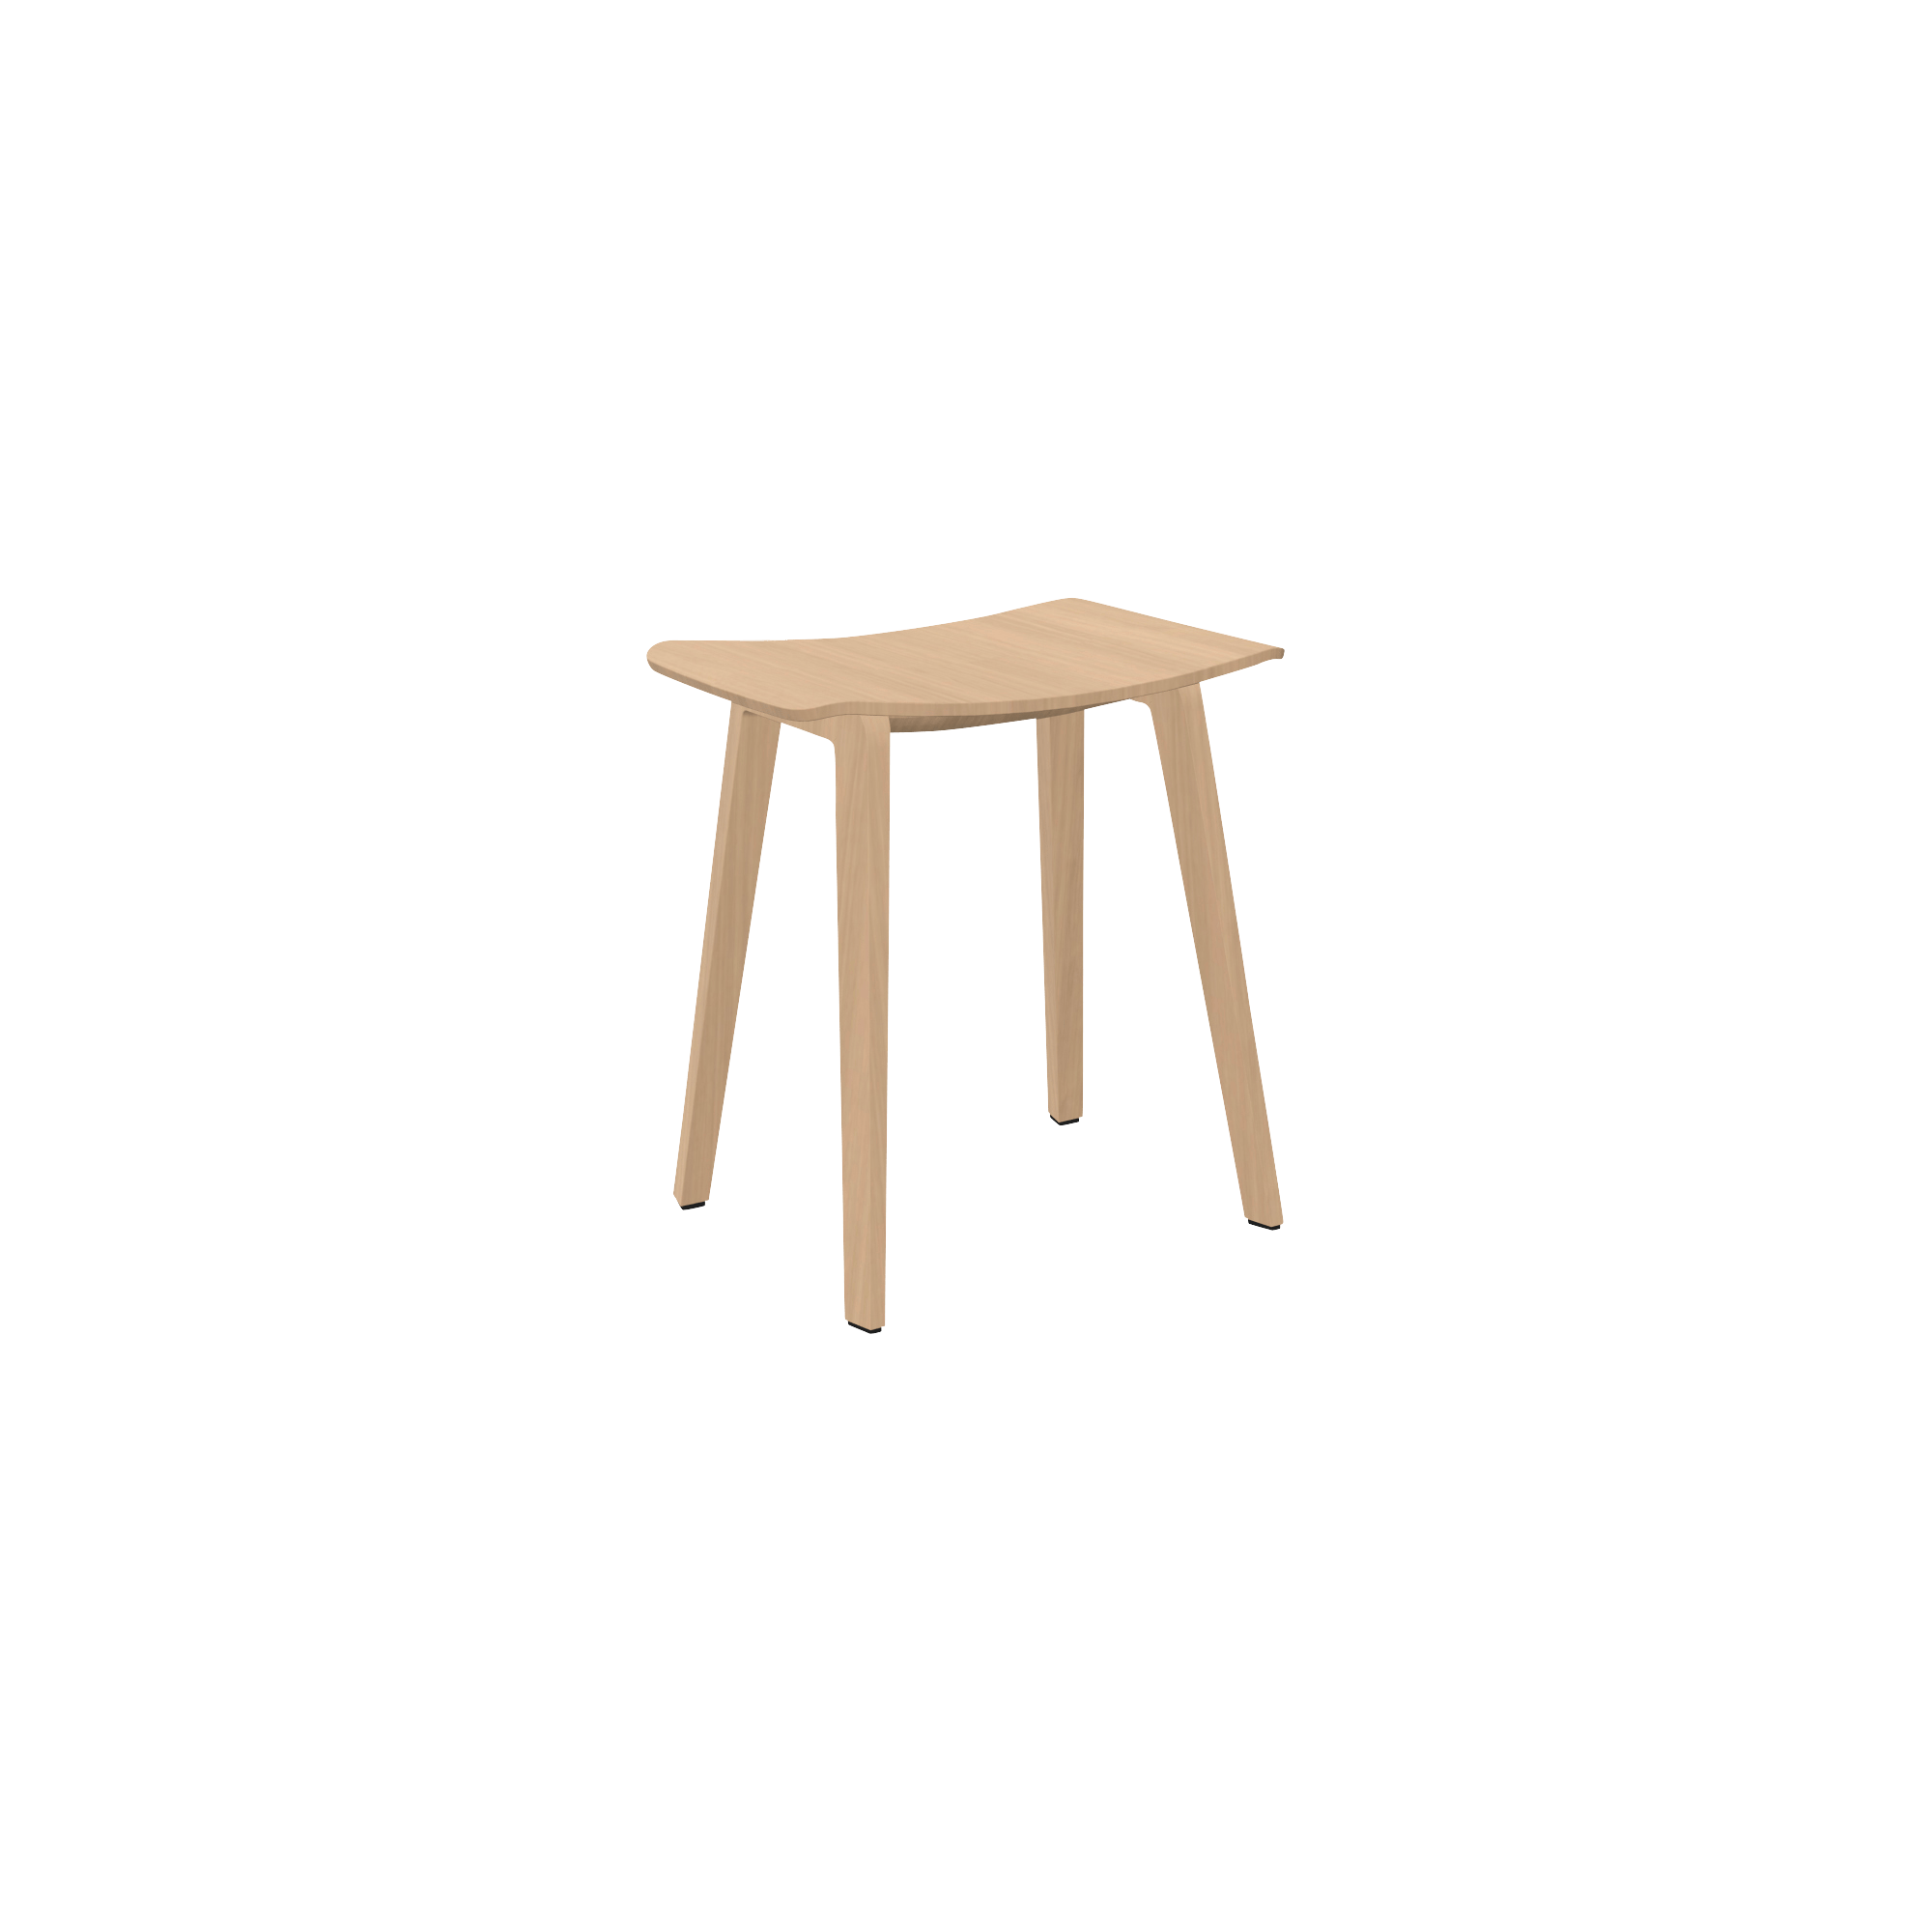 wooden office stool with wooden legs